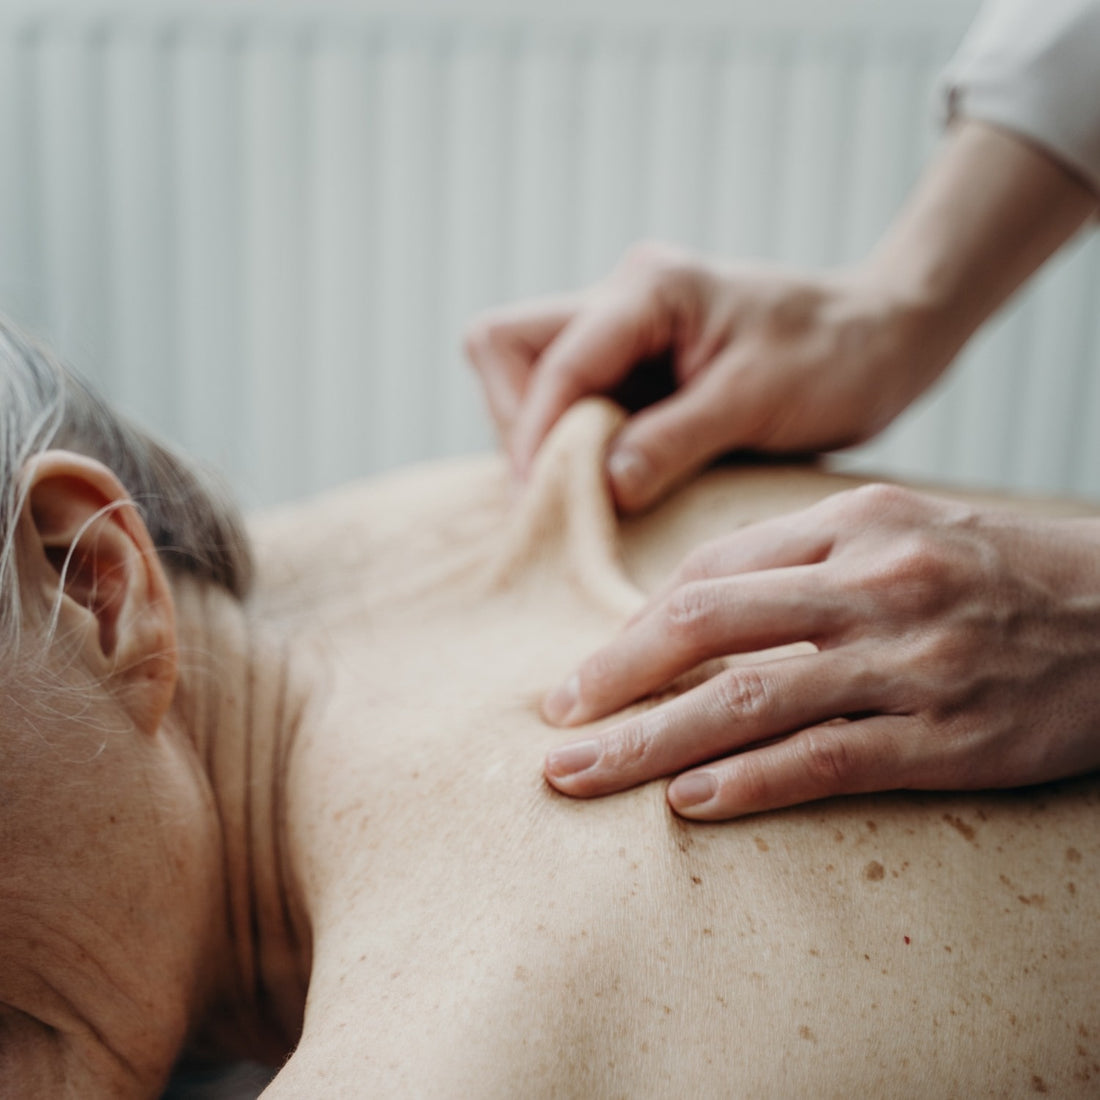 Massage Therapy Helps Ease Neck and Back Pain